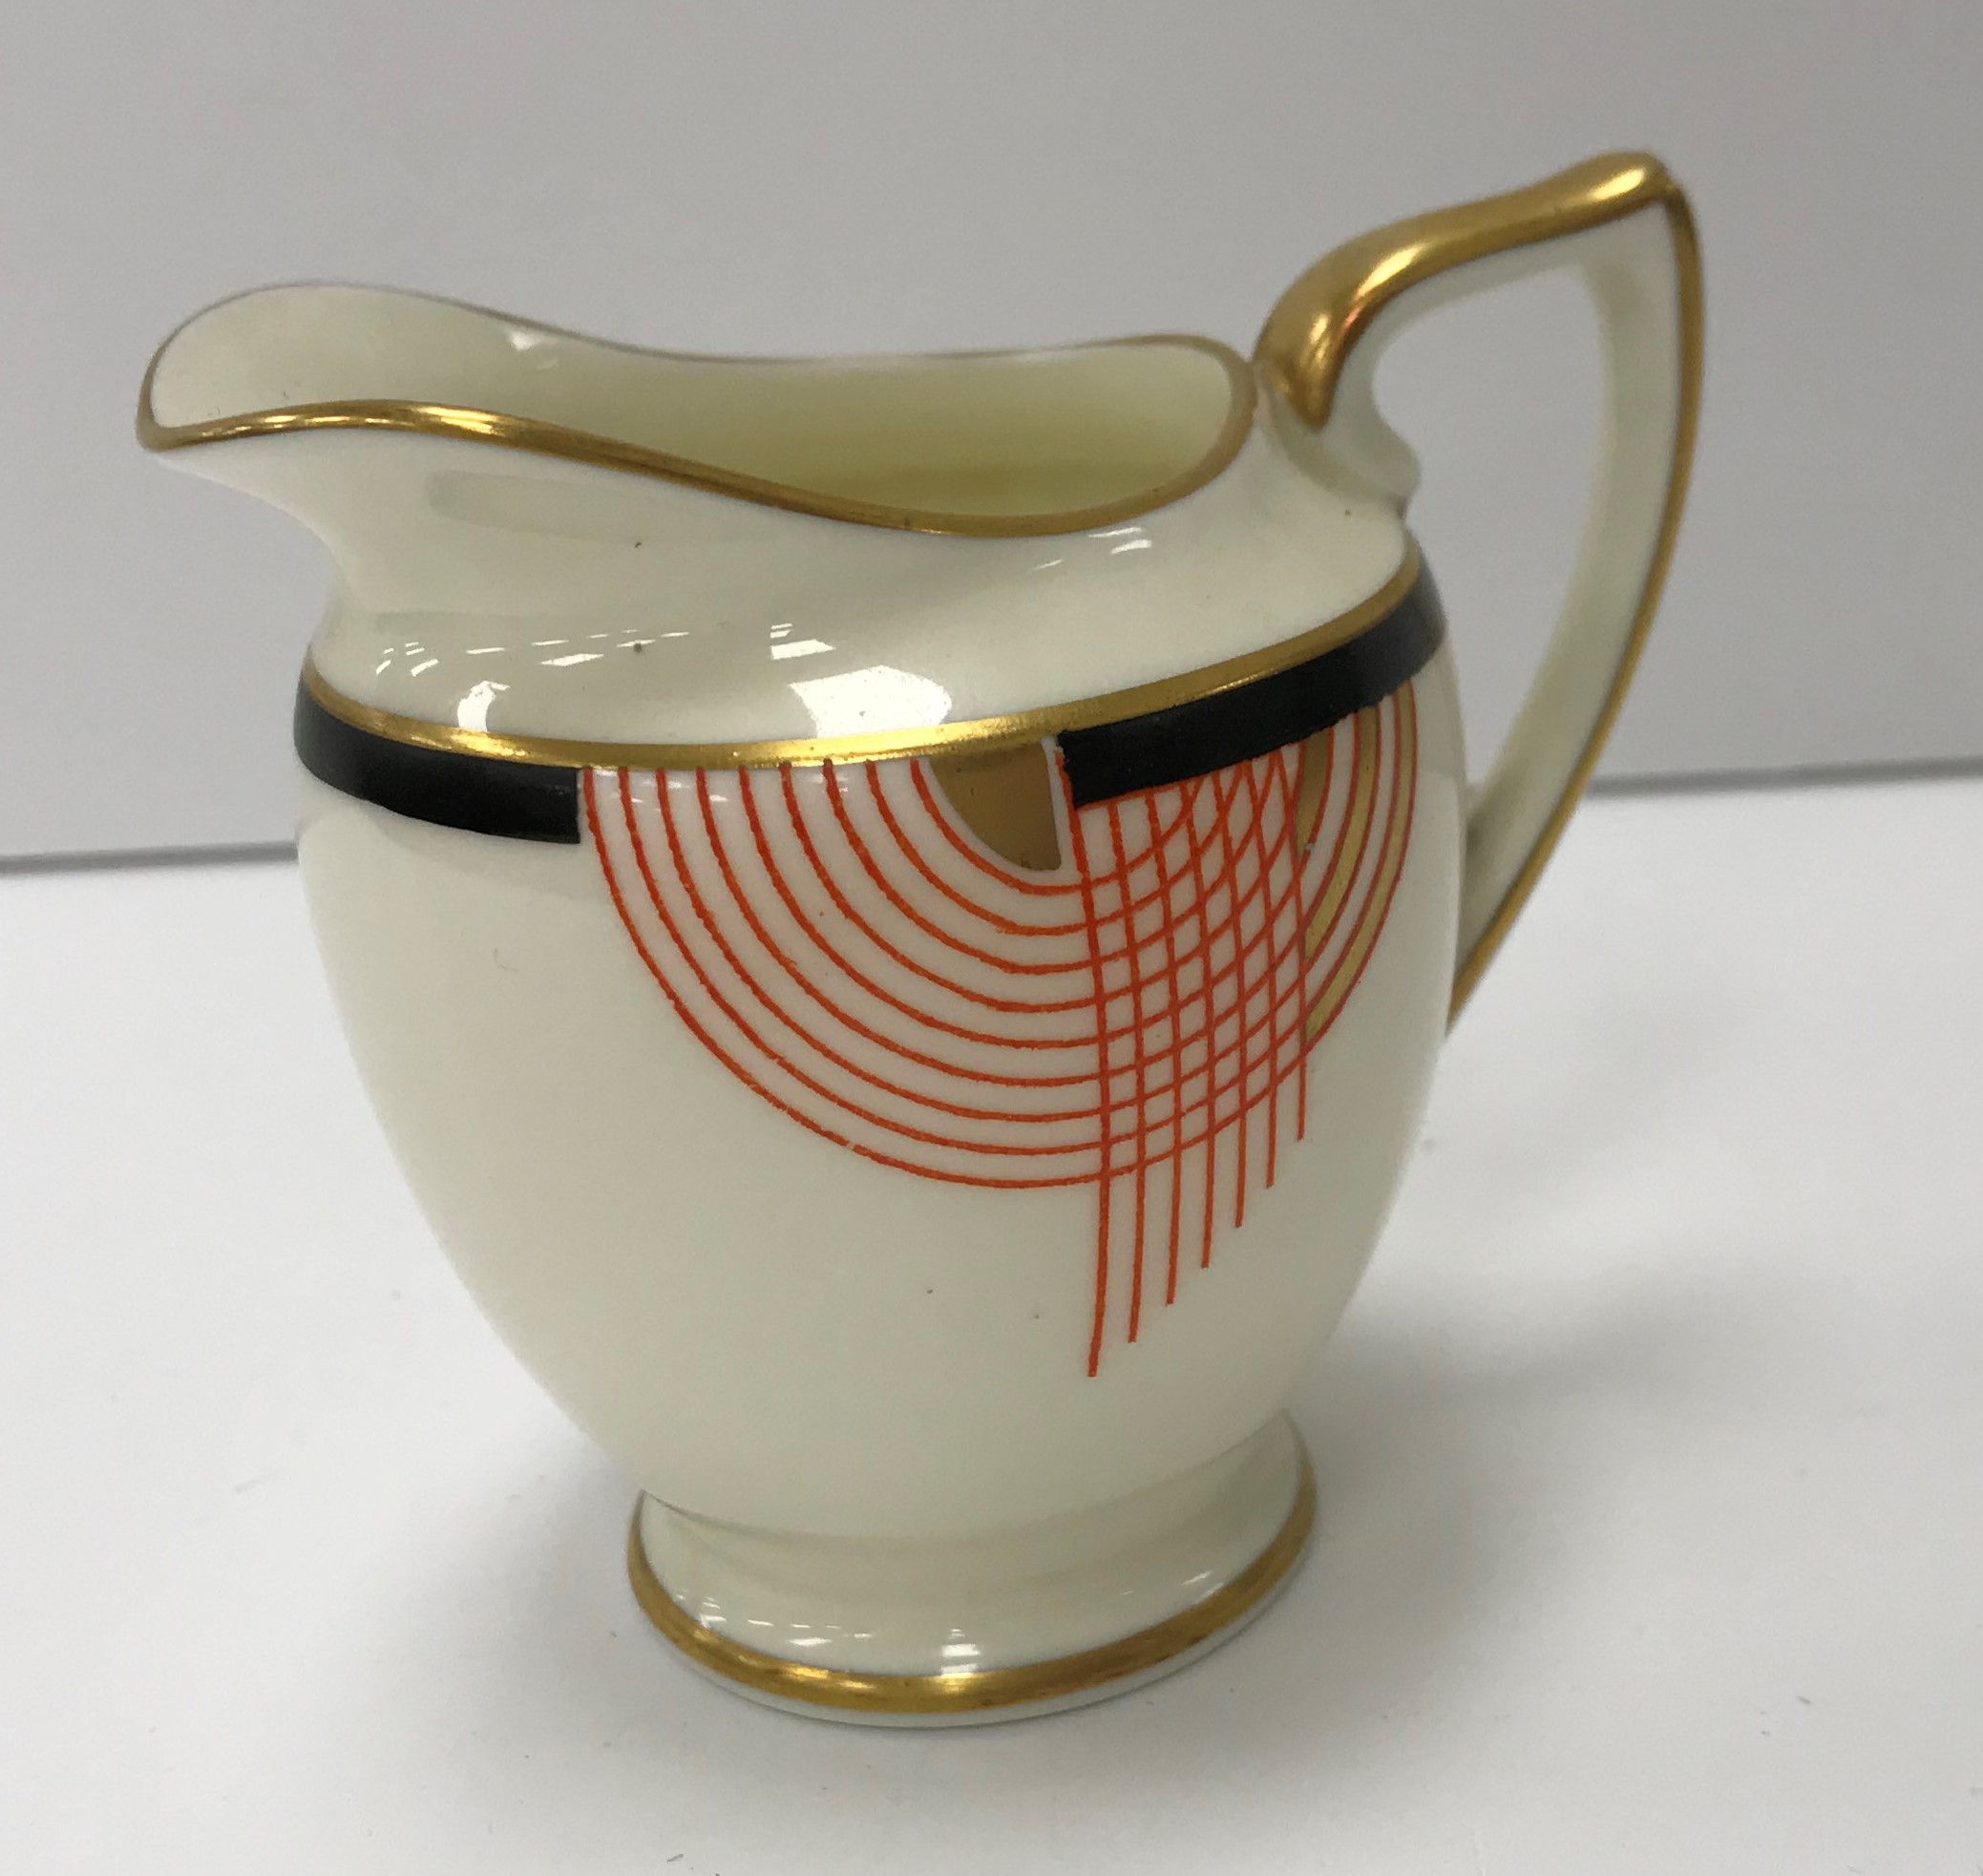 A Royal Doulton "Tango" pattern Art Deco style duet tea set with teapot and stand, cream jug, - Image 2 of 20